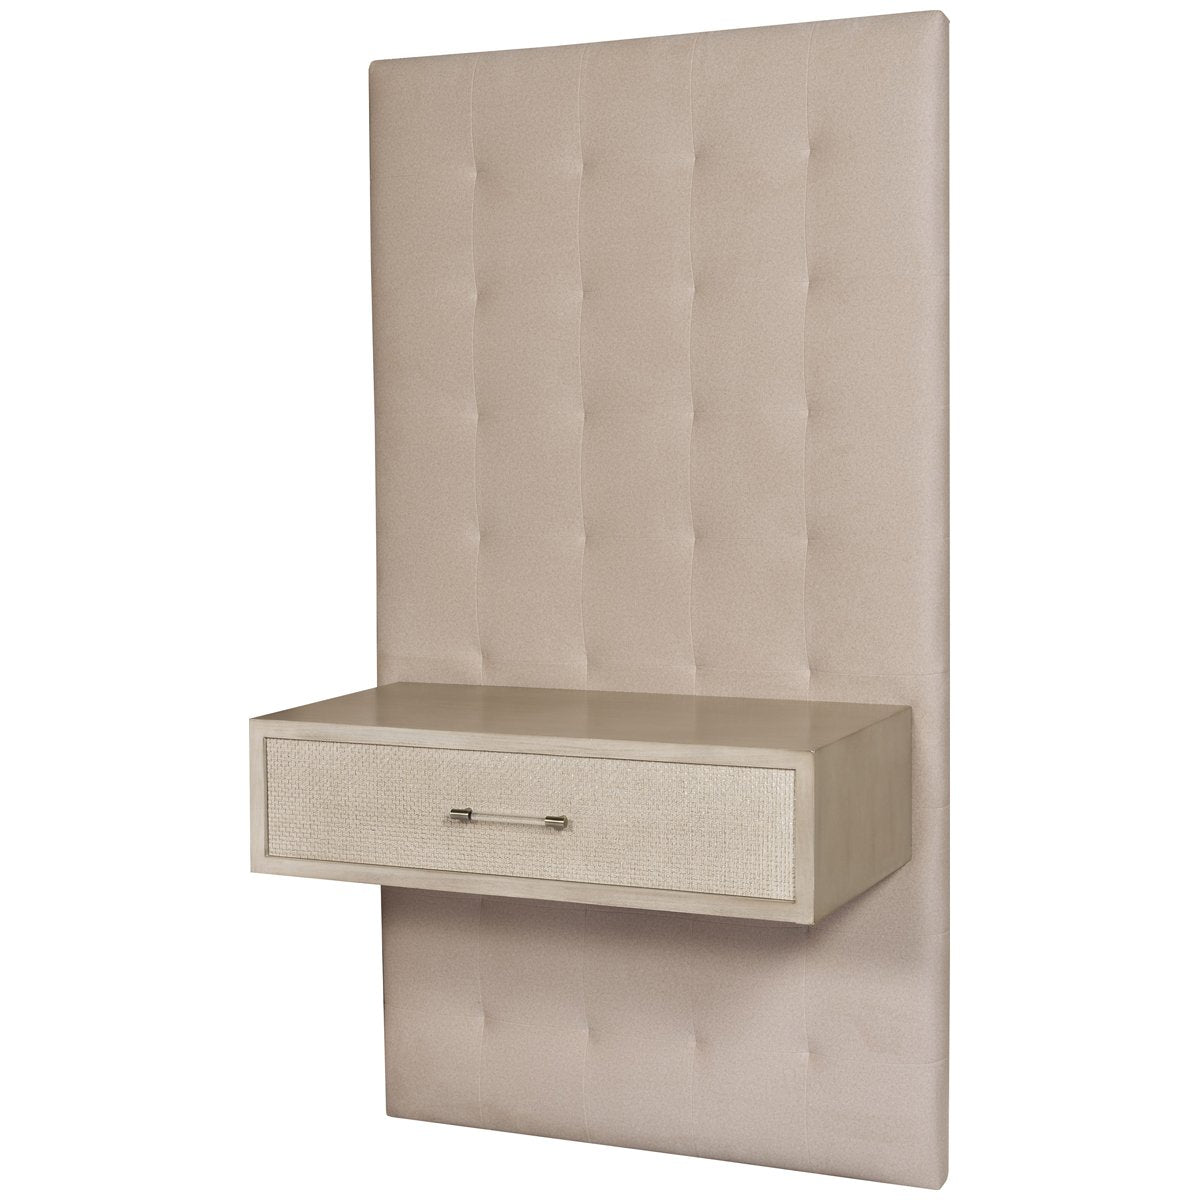 Vanguard Furniture Wyeth Biscuit Tufted Wing with Nightstand